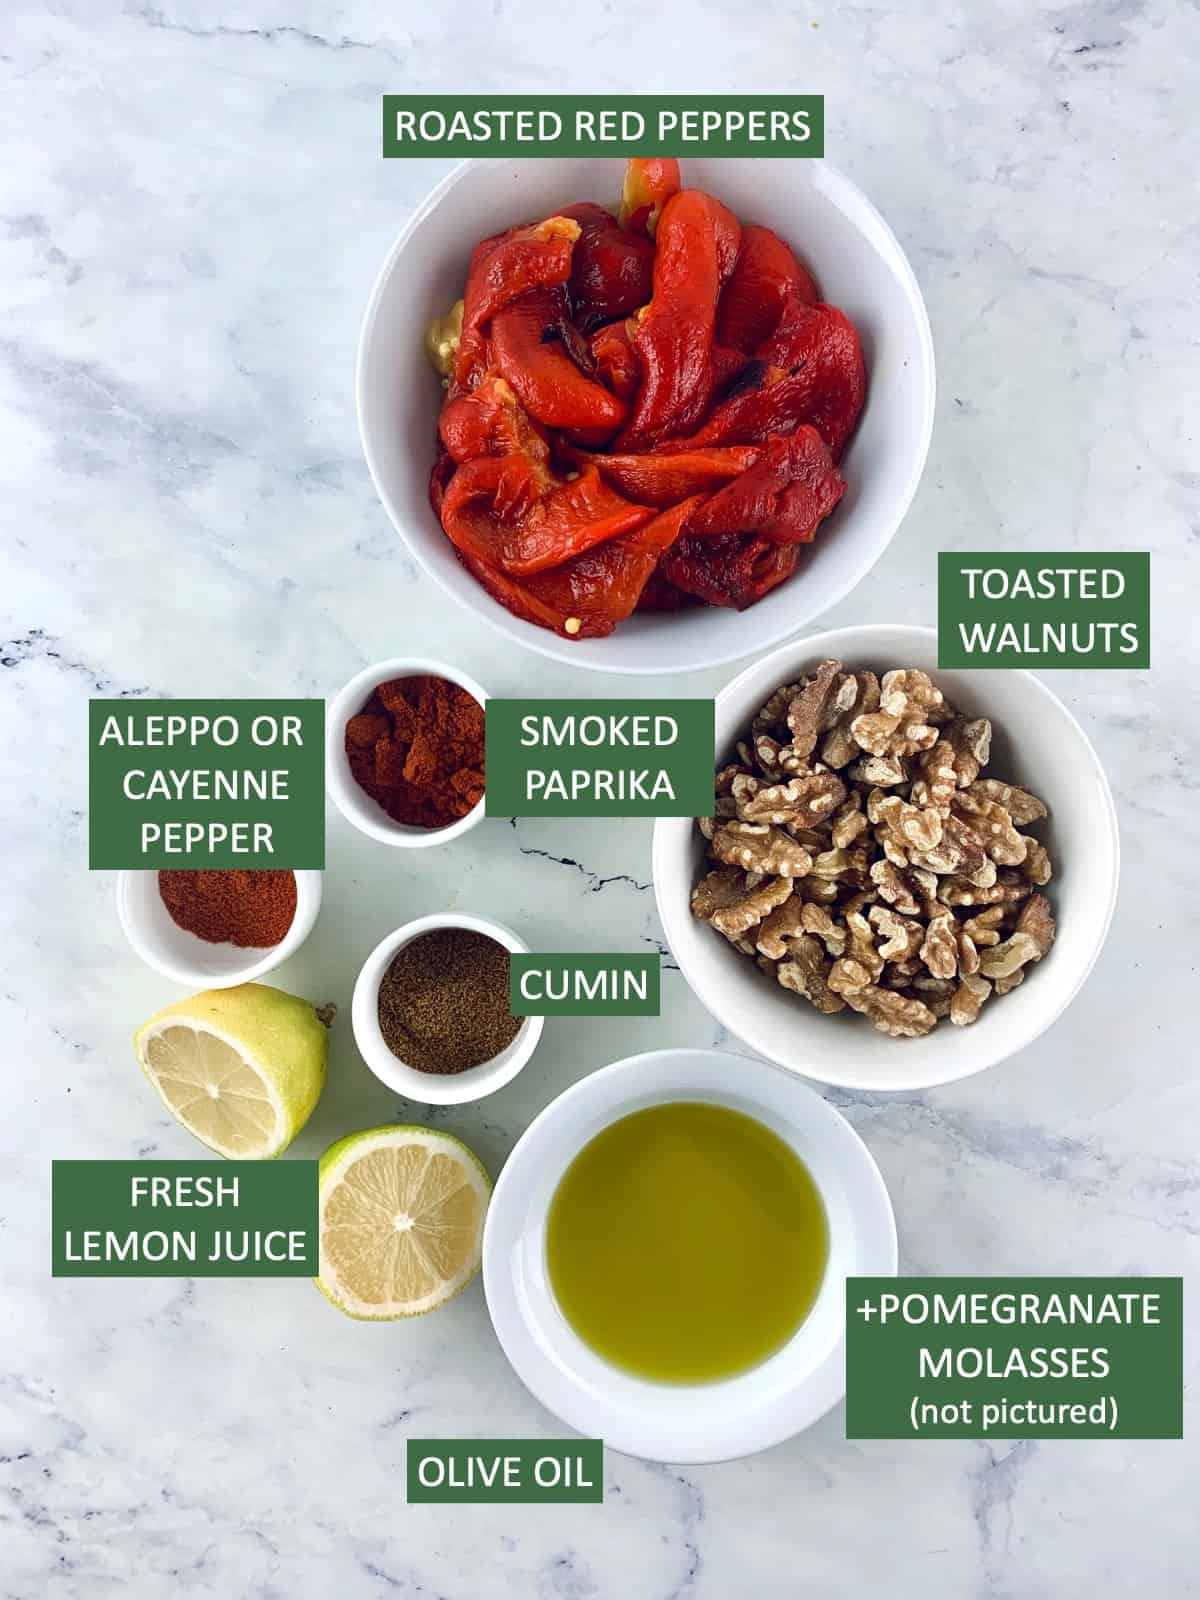 Labelled ingredients needed to make our Lebanese Muhammara Recipe.